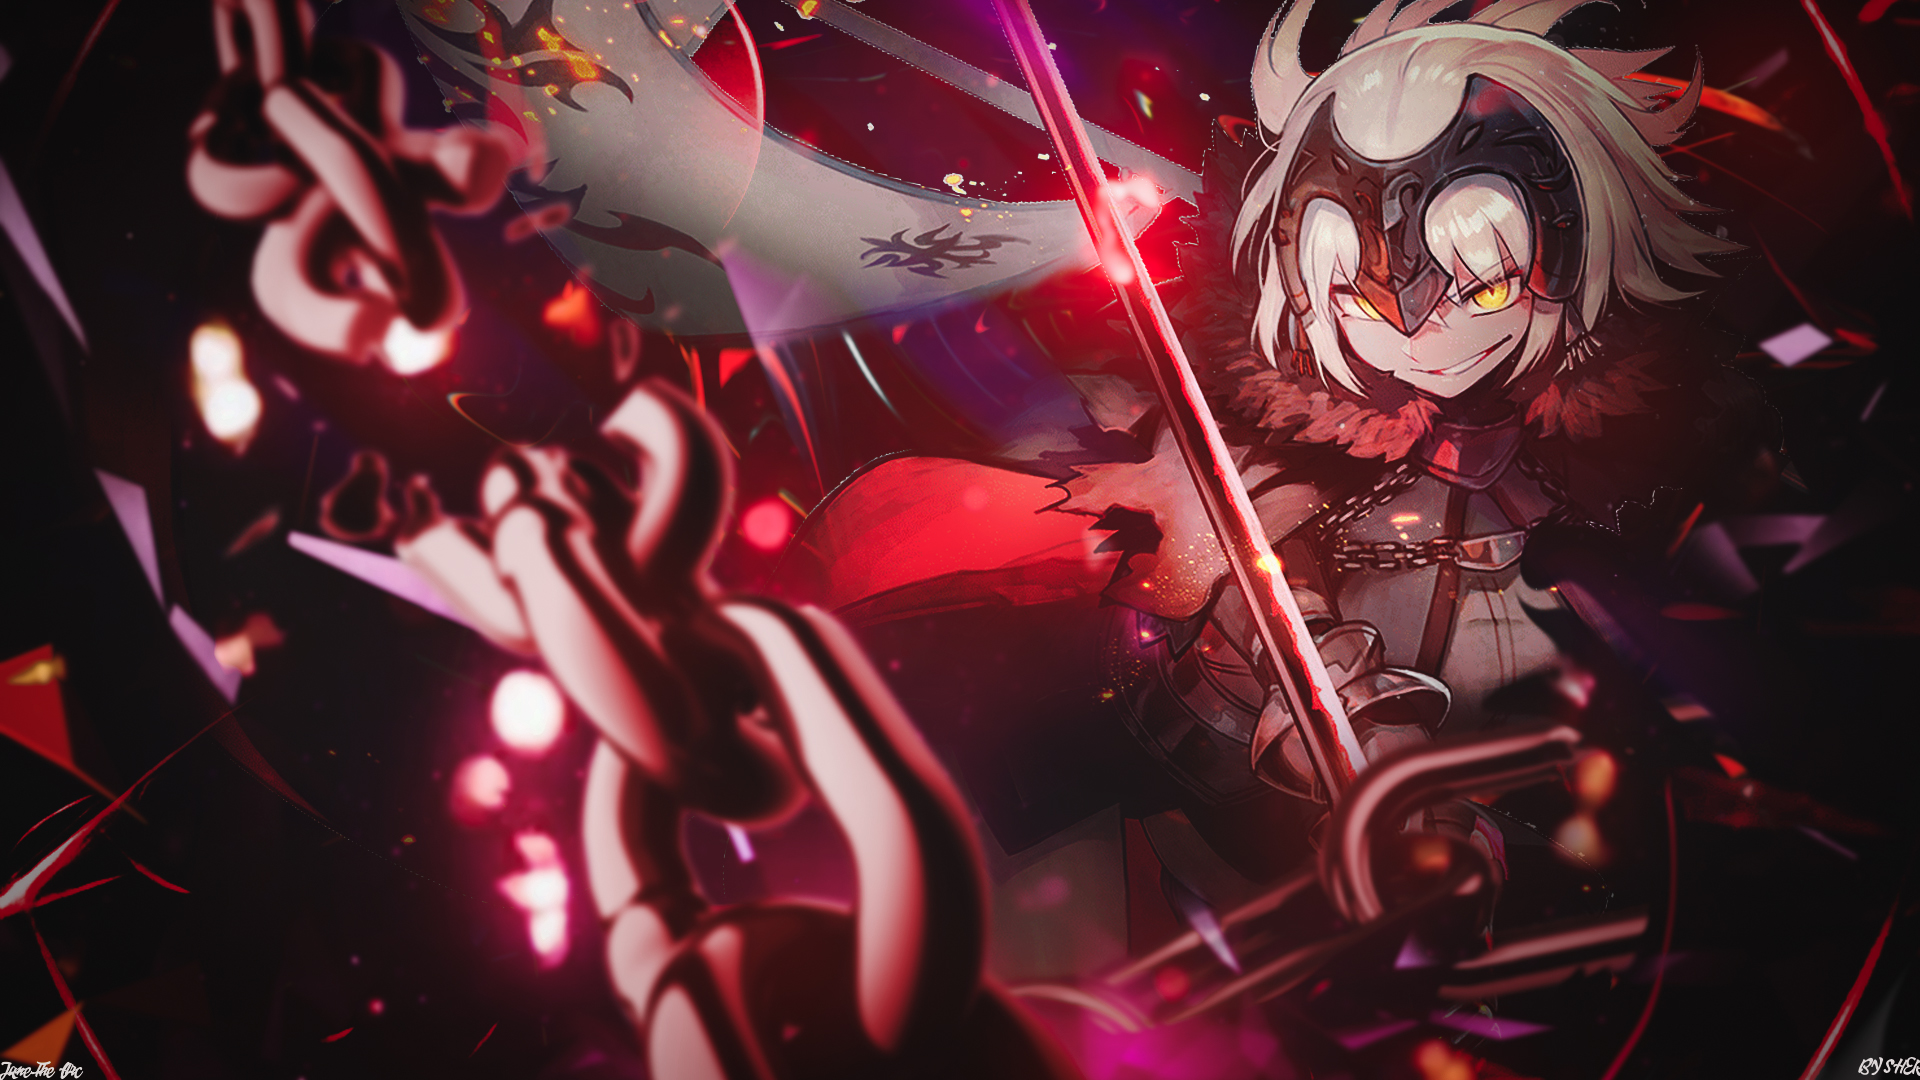 Fate Apocrypha Fate Grand Order Jeanne Alter Fate Grand Order Anime Dark Alter Ego Signature Armor S 1920x1080